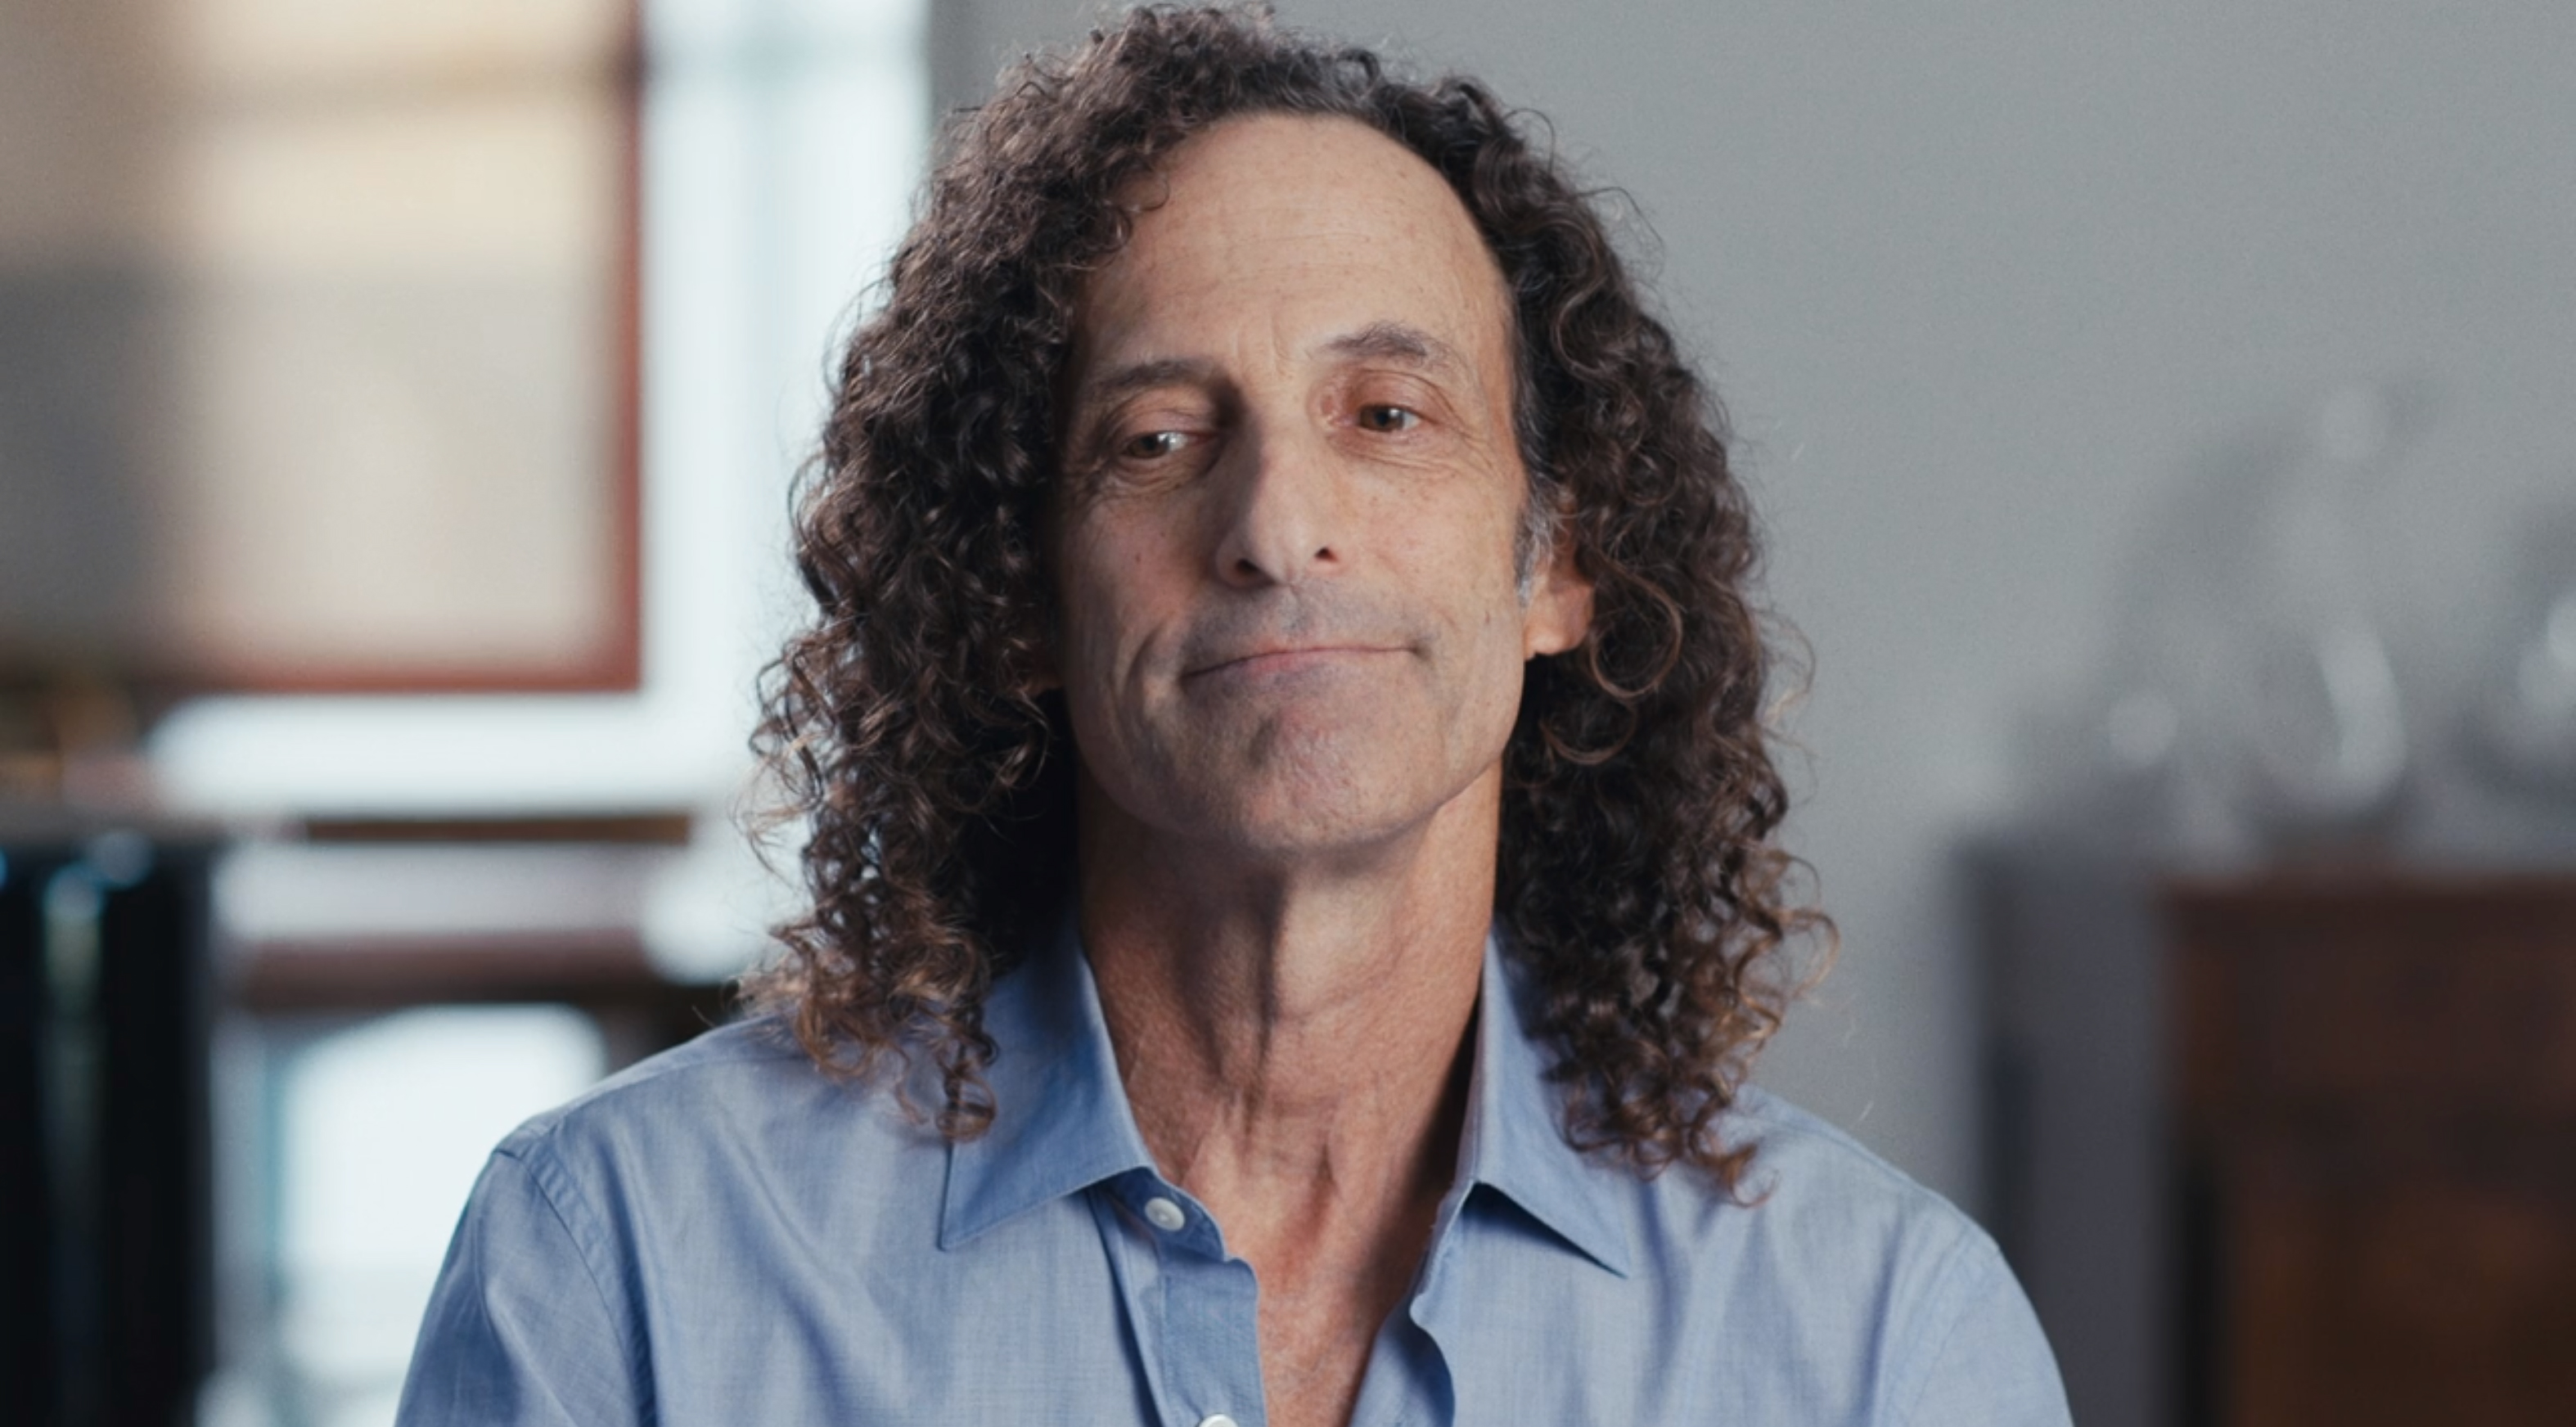 Kenny G reflecting on his white privilege